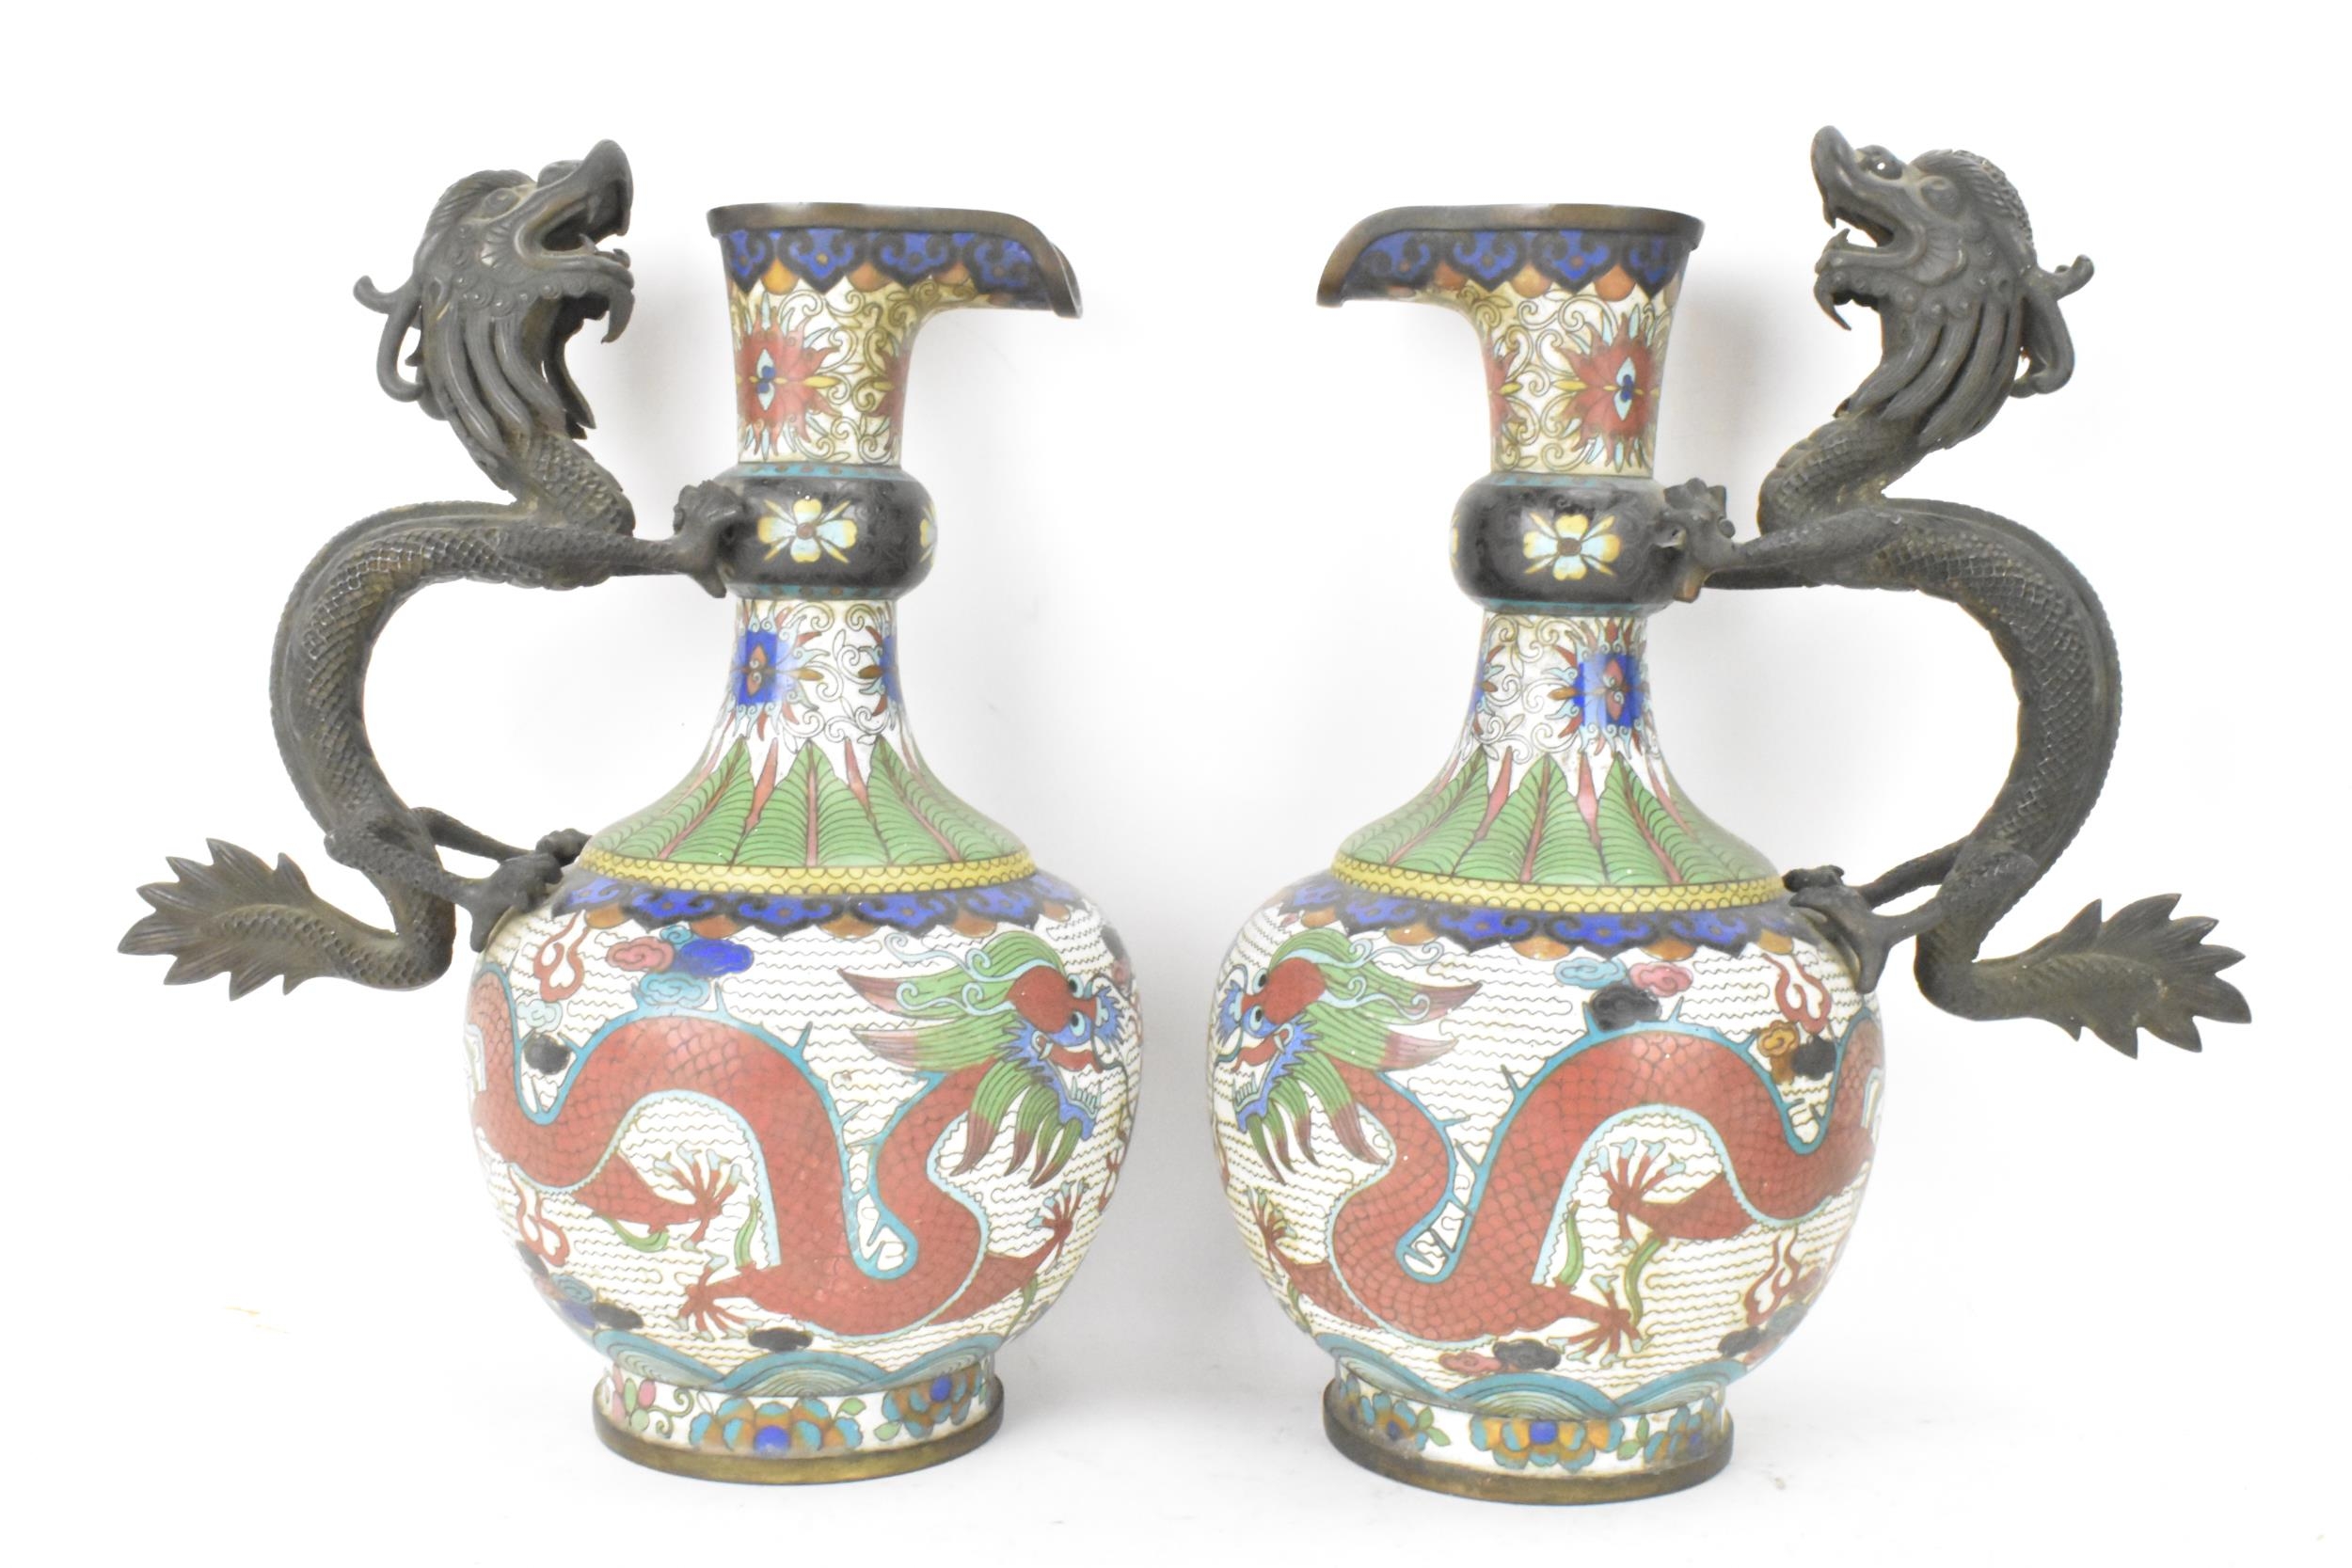 A pair of Chinese late Qing dynasty cloisonne ewers, both having a handle modelled in the form of